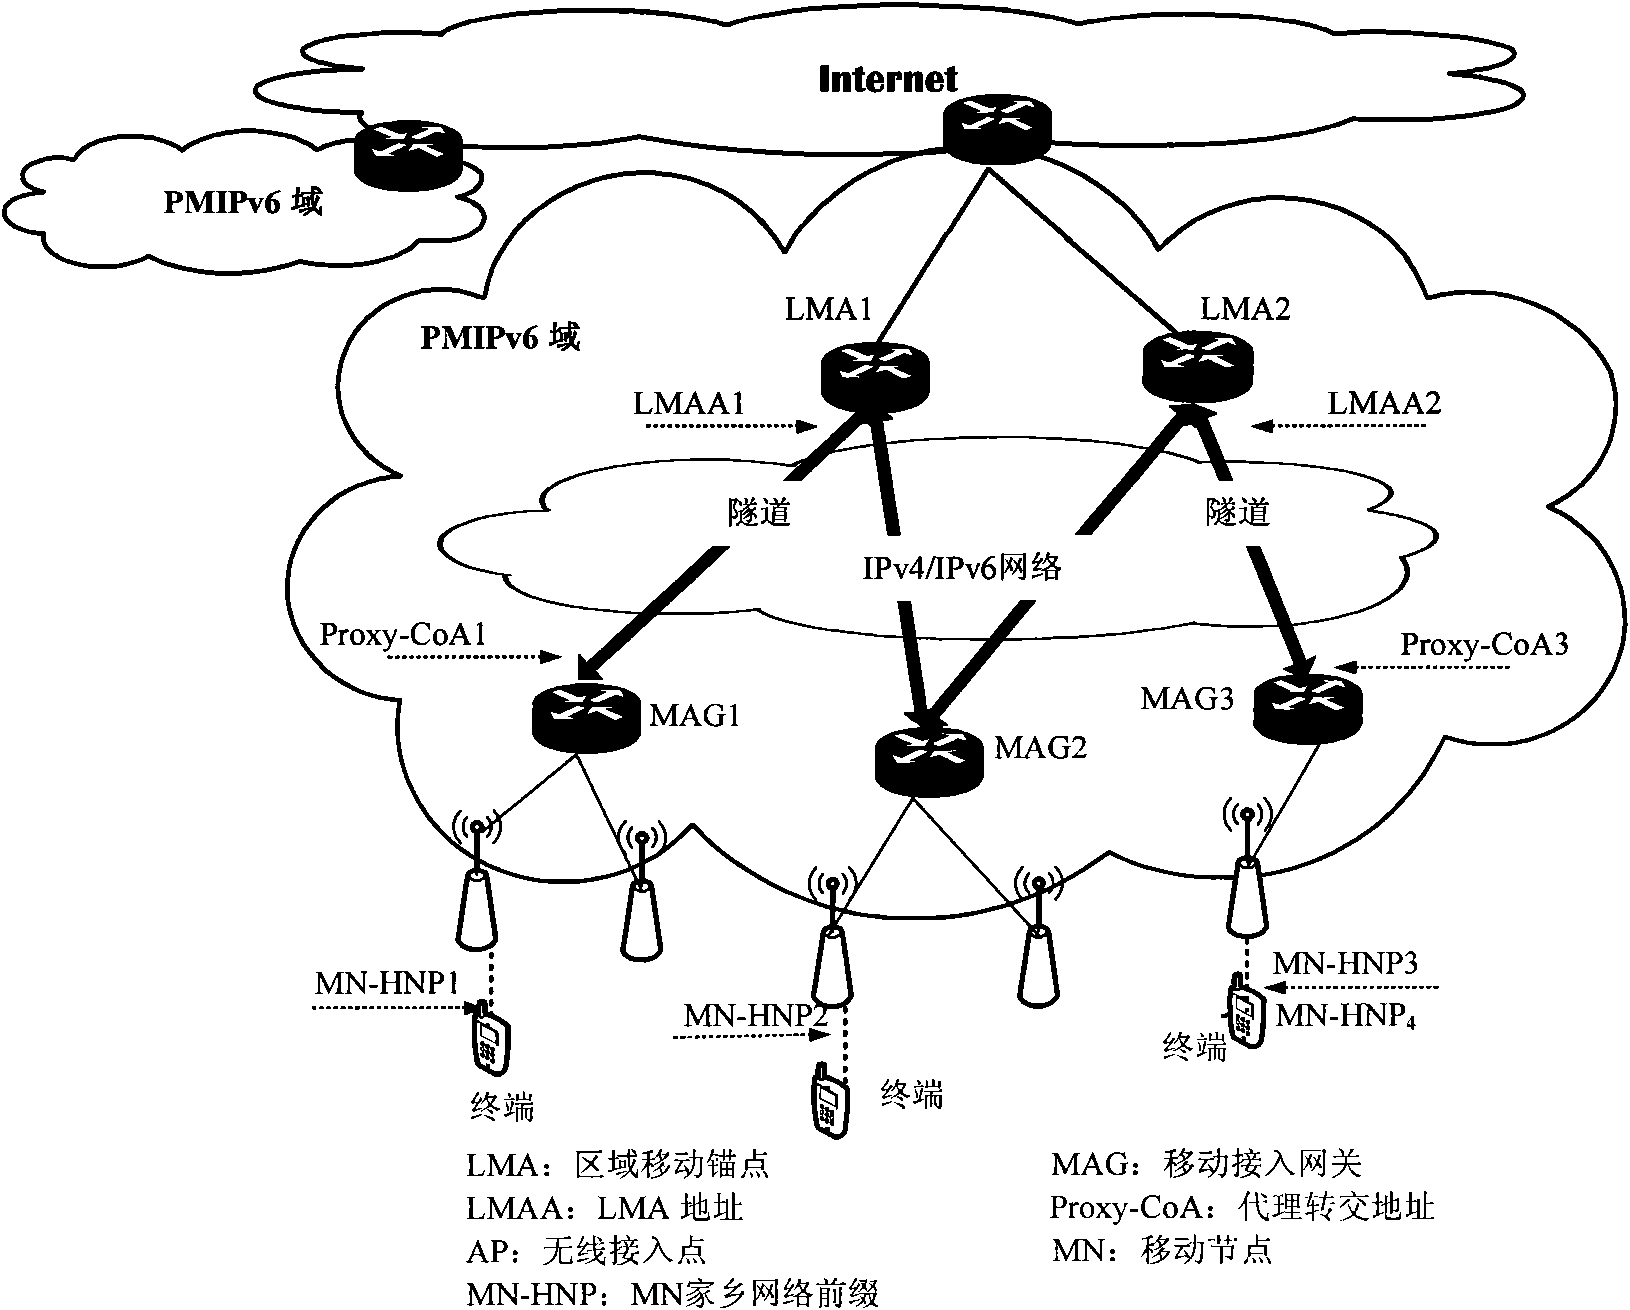 Method and system for performing anycast in internet protocol (IP) network capable of supporting node movement